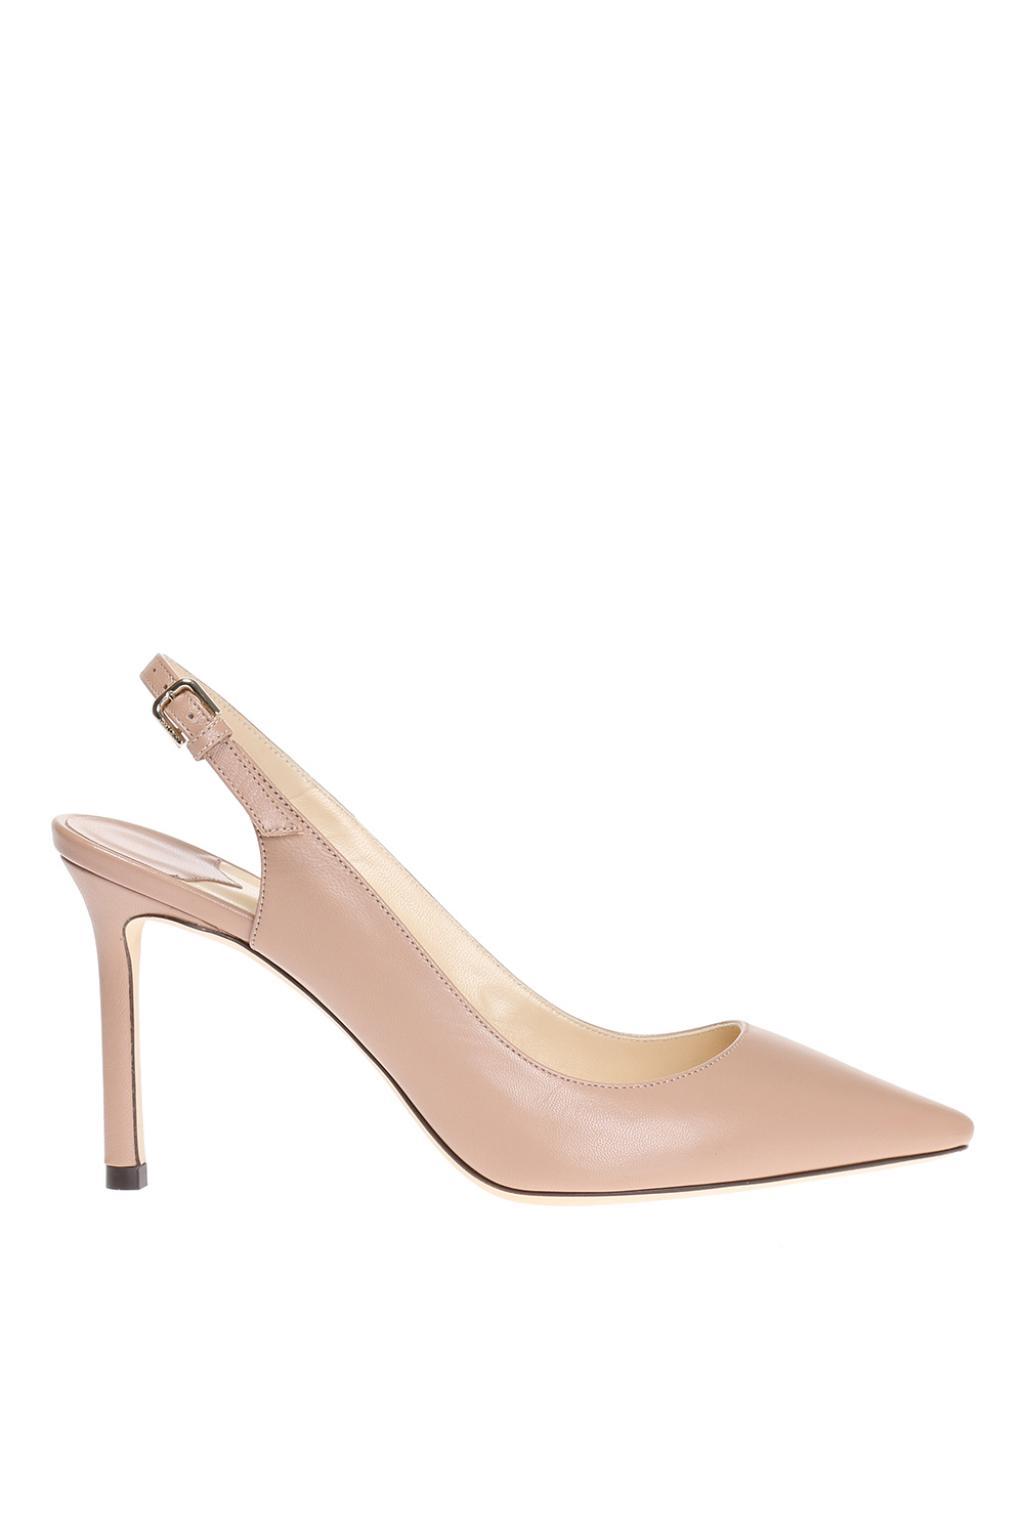 Jimmy Choo Leather 'erin' Cut-out Pumps in Beige (Natural) - Lyst